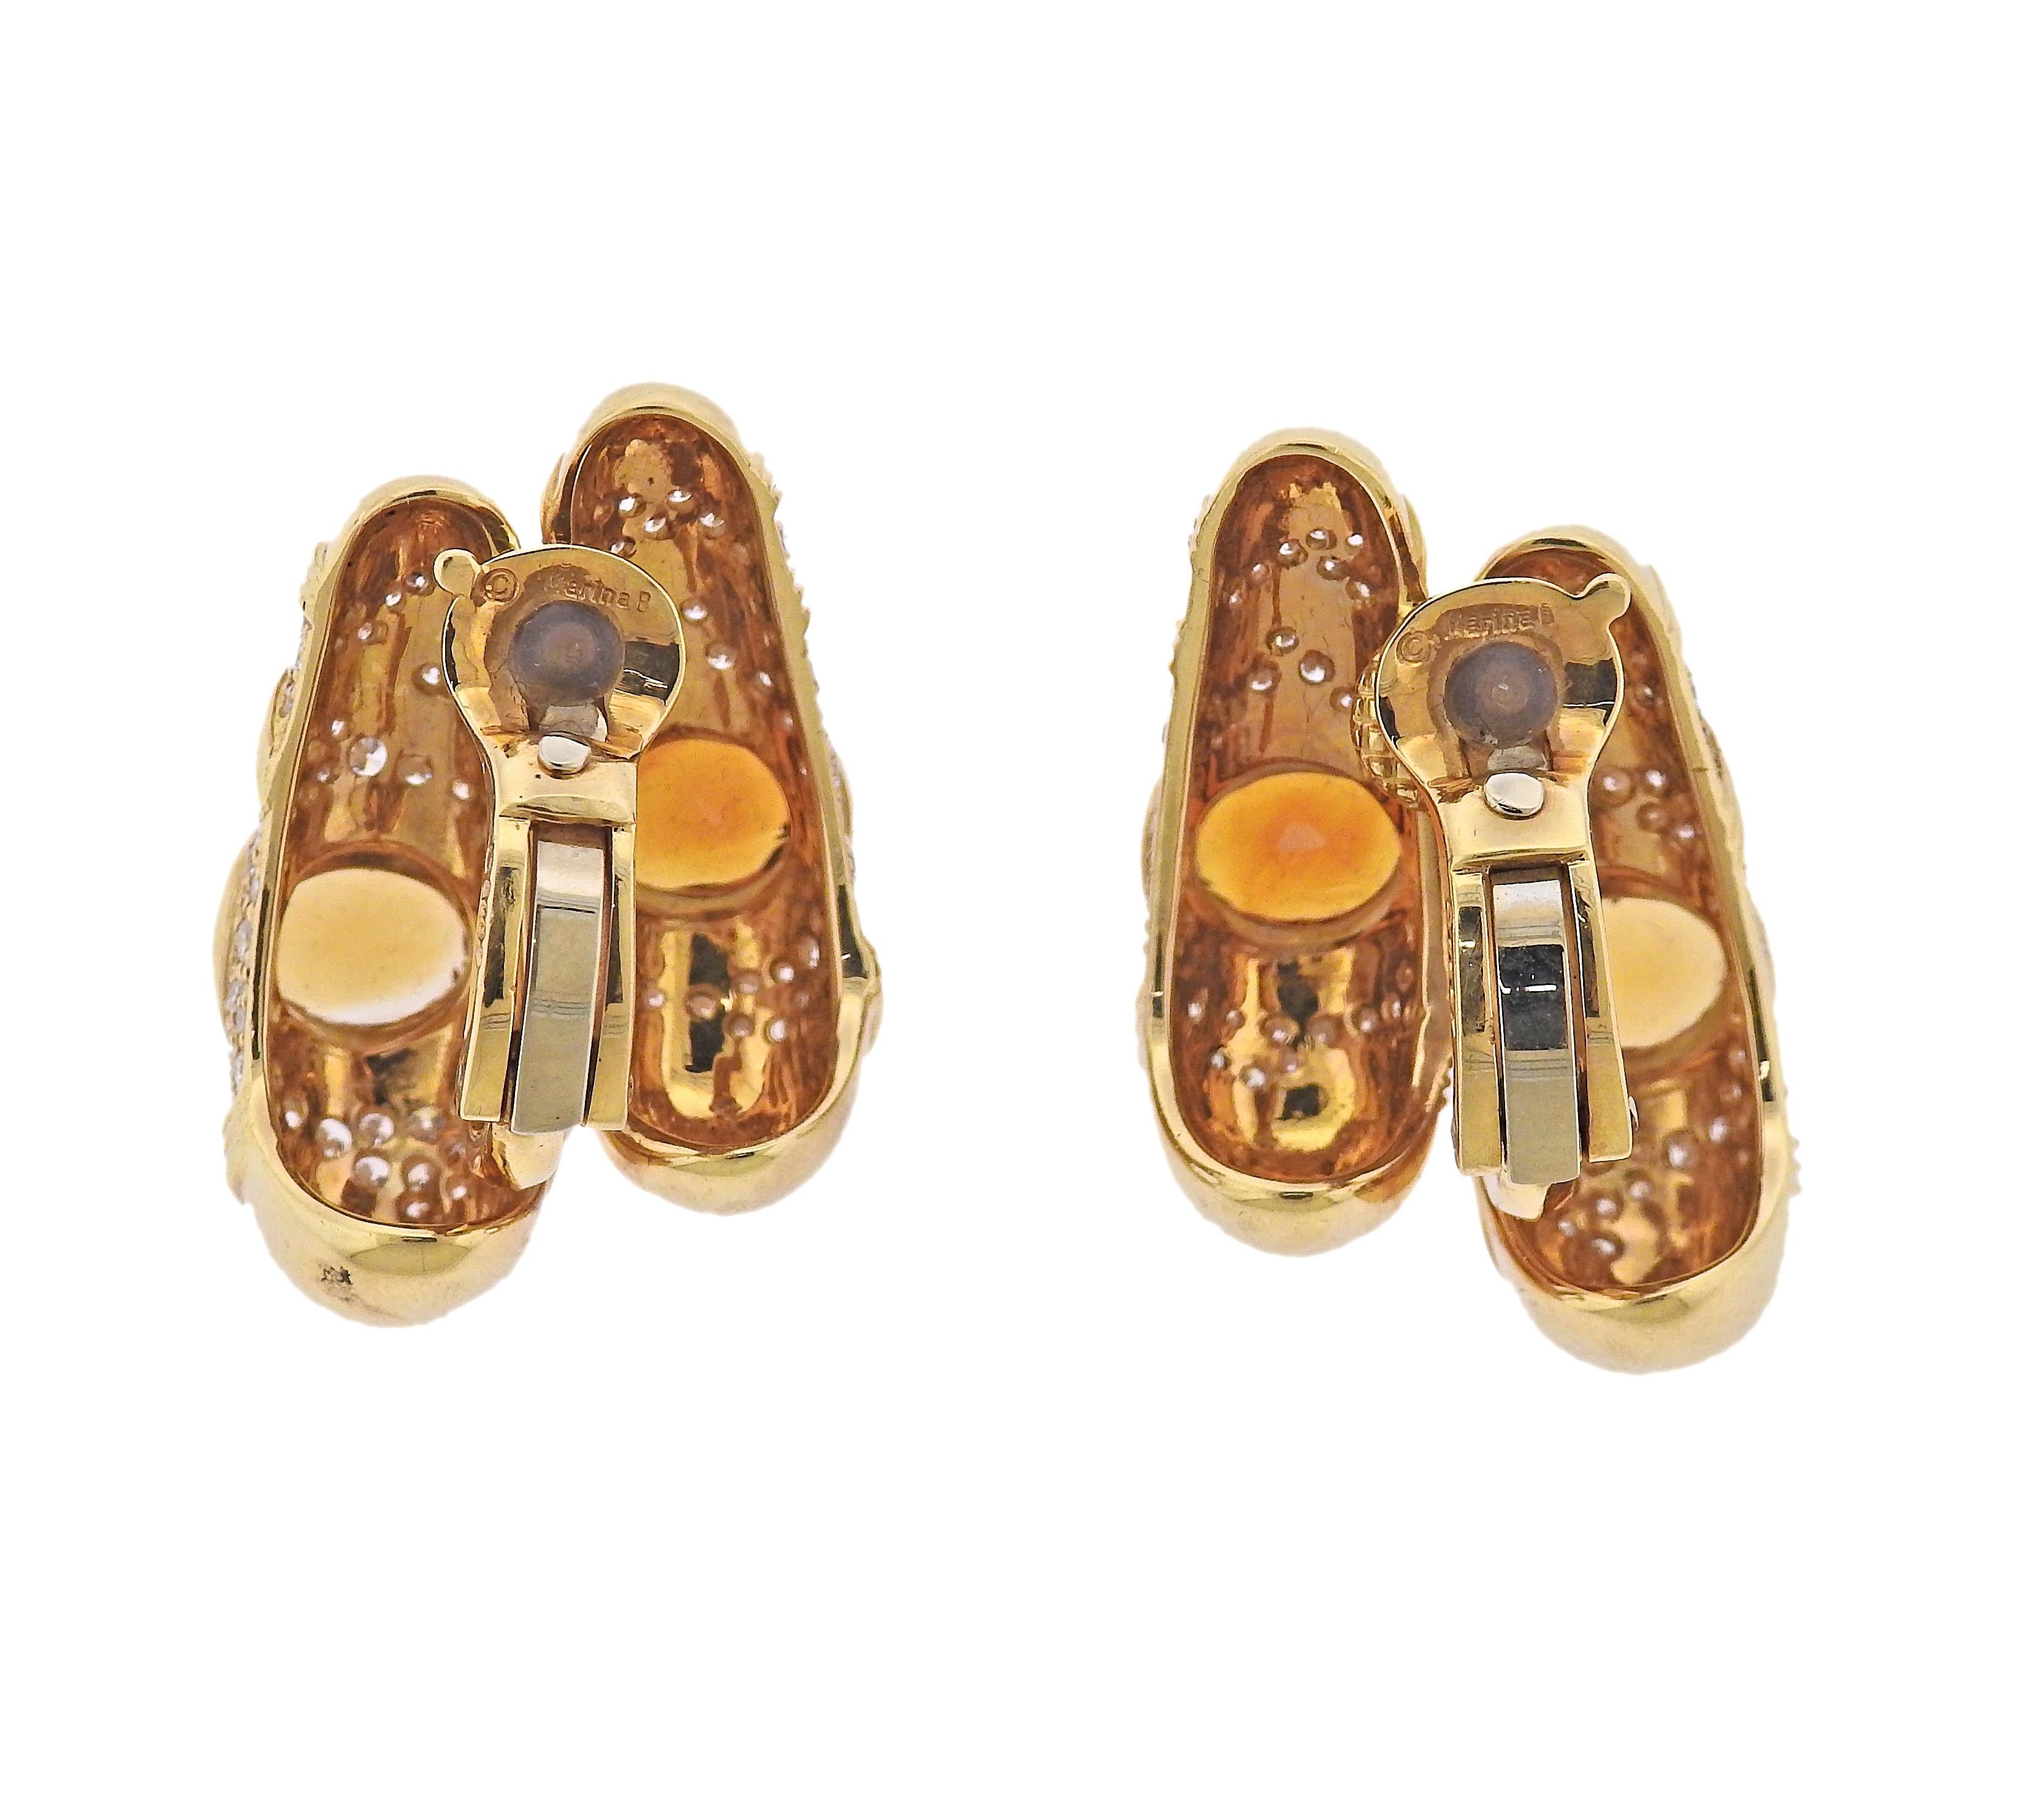 Pair of large 18k gold Huda earrings by Marina B, with oval faceted citrines and approx. 1.80ctw in G/VS diamonds. Earrings measure 30mm x 26mm. Marked: Marina B, MB, 750, C5007. Weight - 48.4 grams.